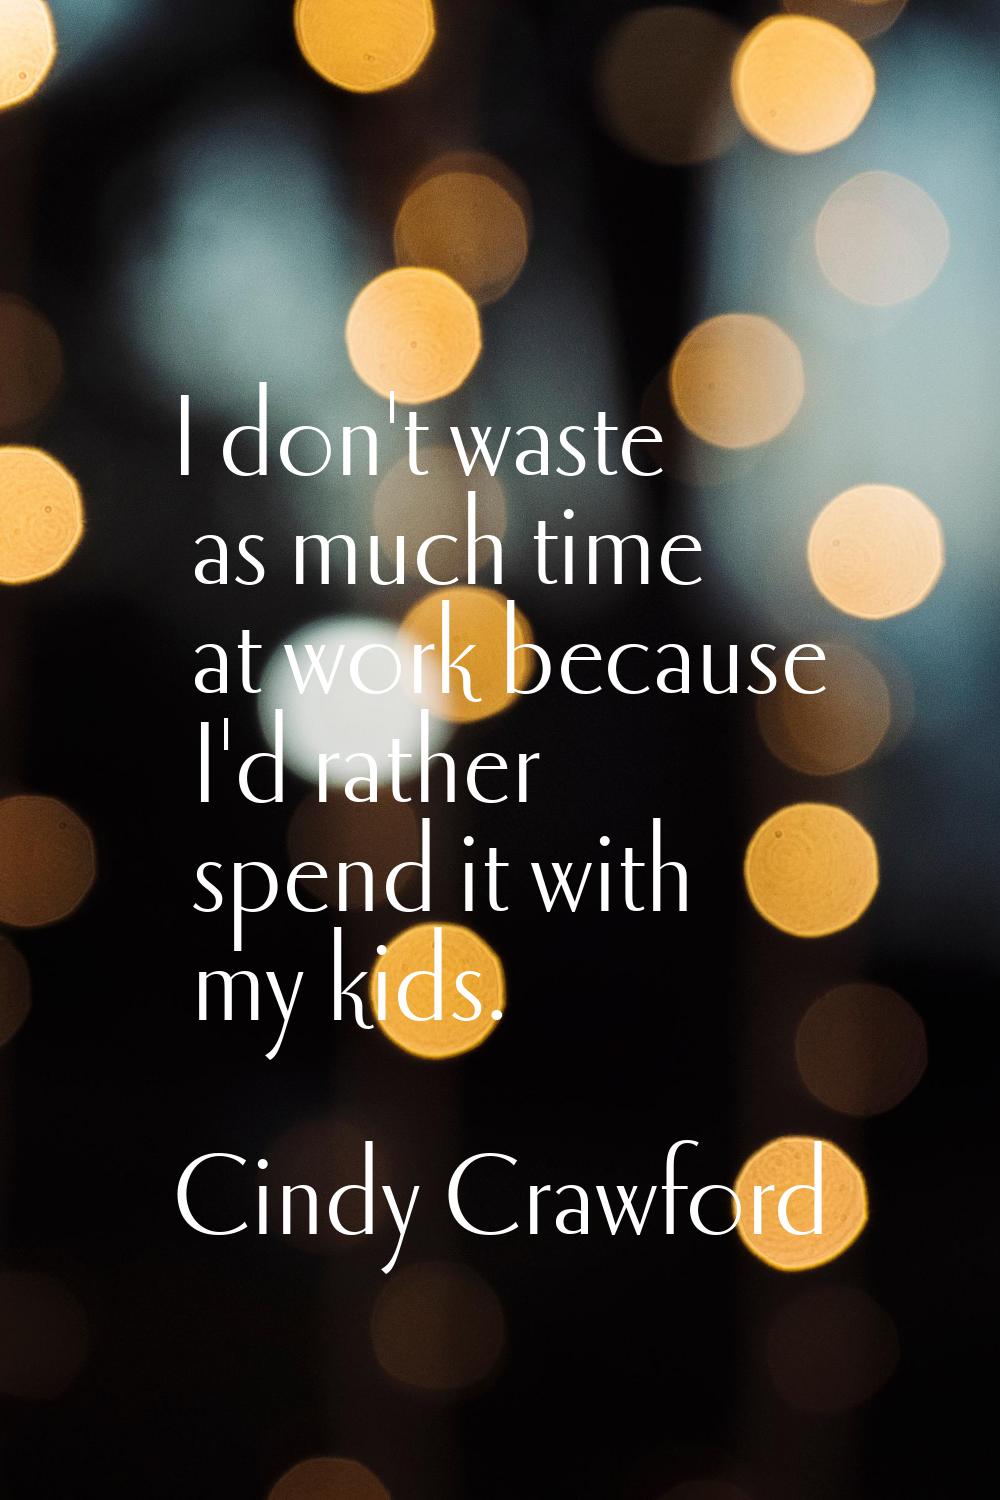 I don't waste as much time at work because I'd rather spend it with my kids.